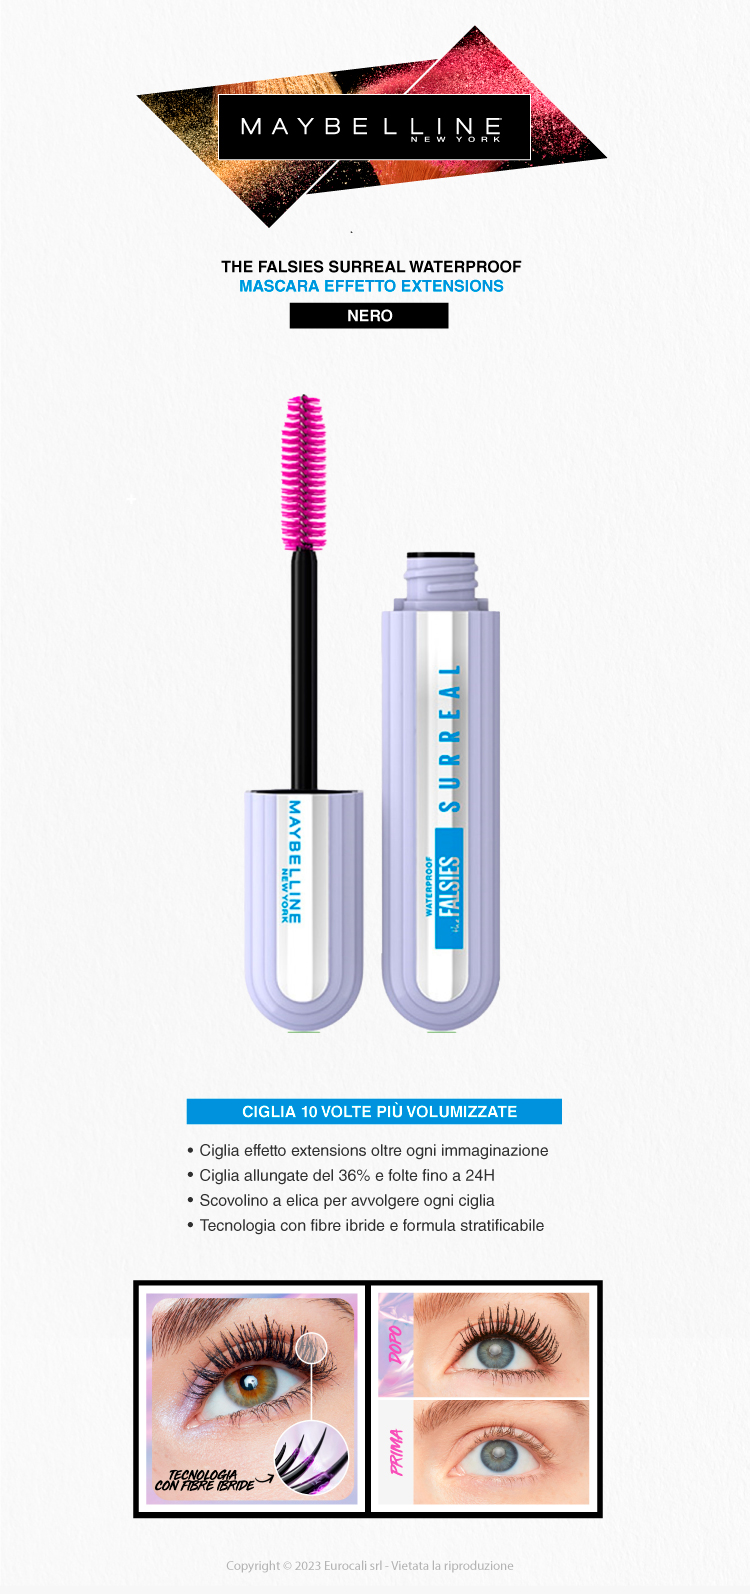 Maybelline The Falsies Surreal Waterproof Mascara effetto extensions